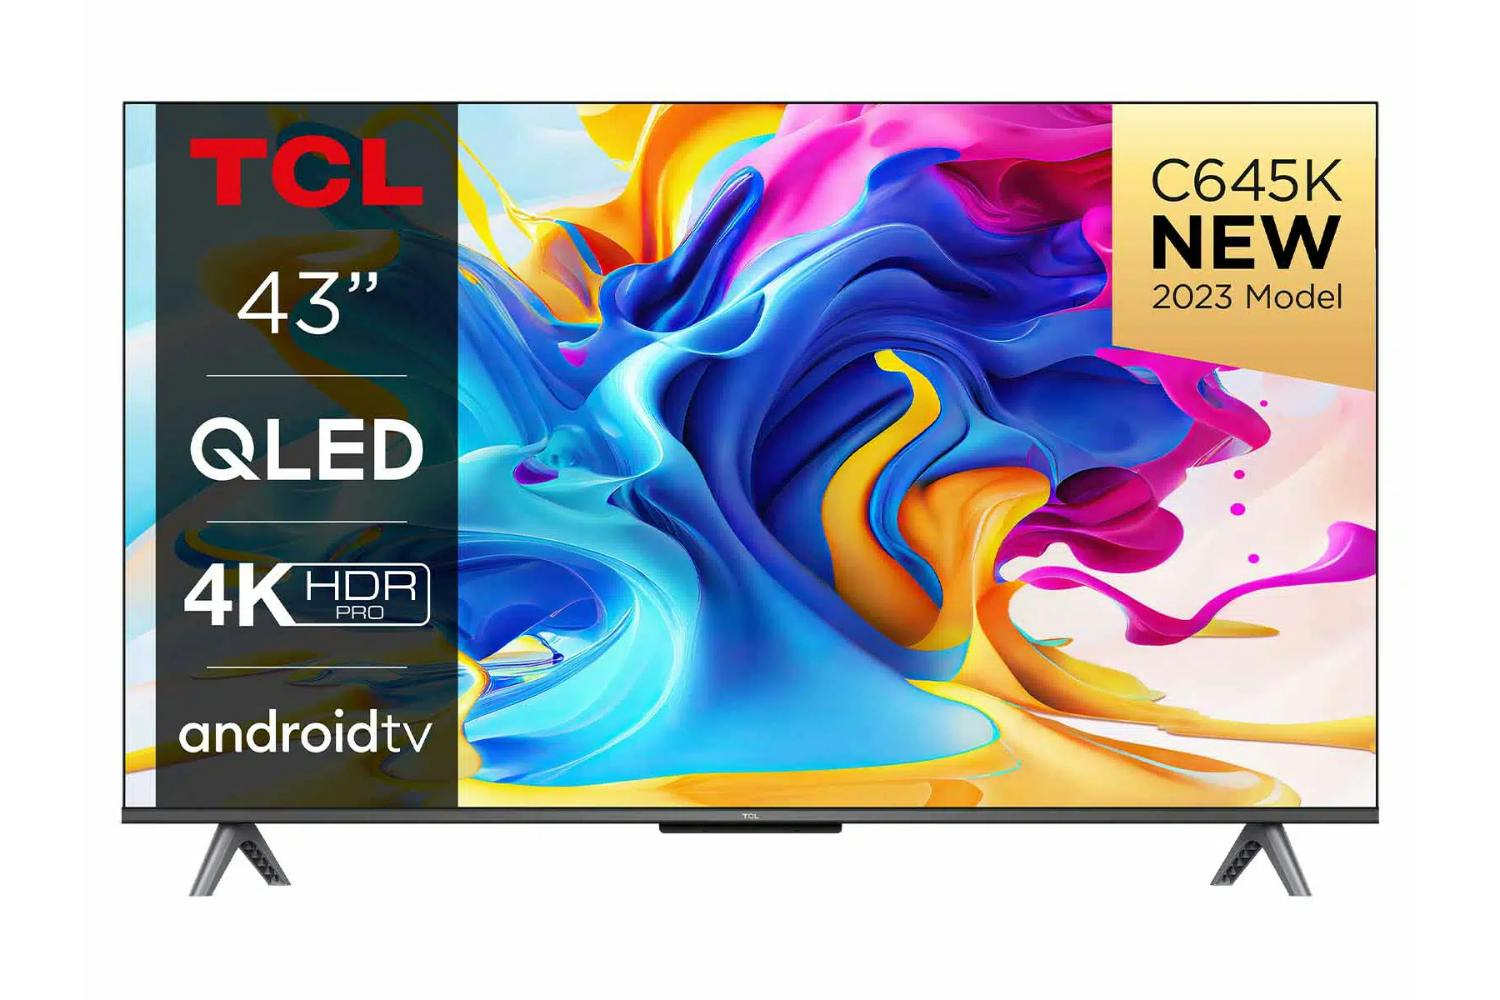 TCL 43" 4K QLED Android Smart TV | 43C645K